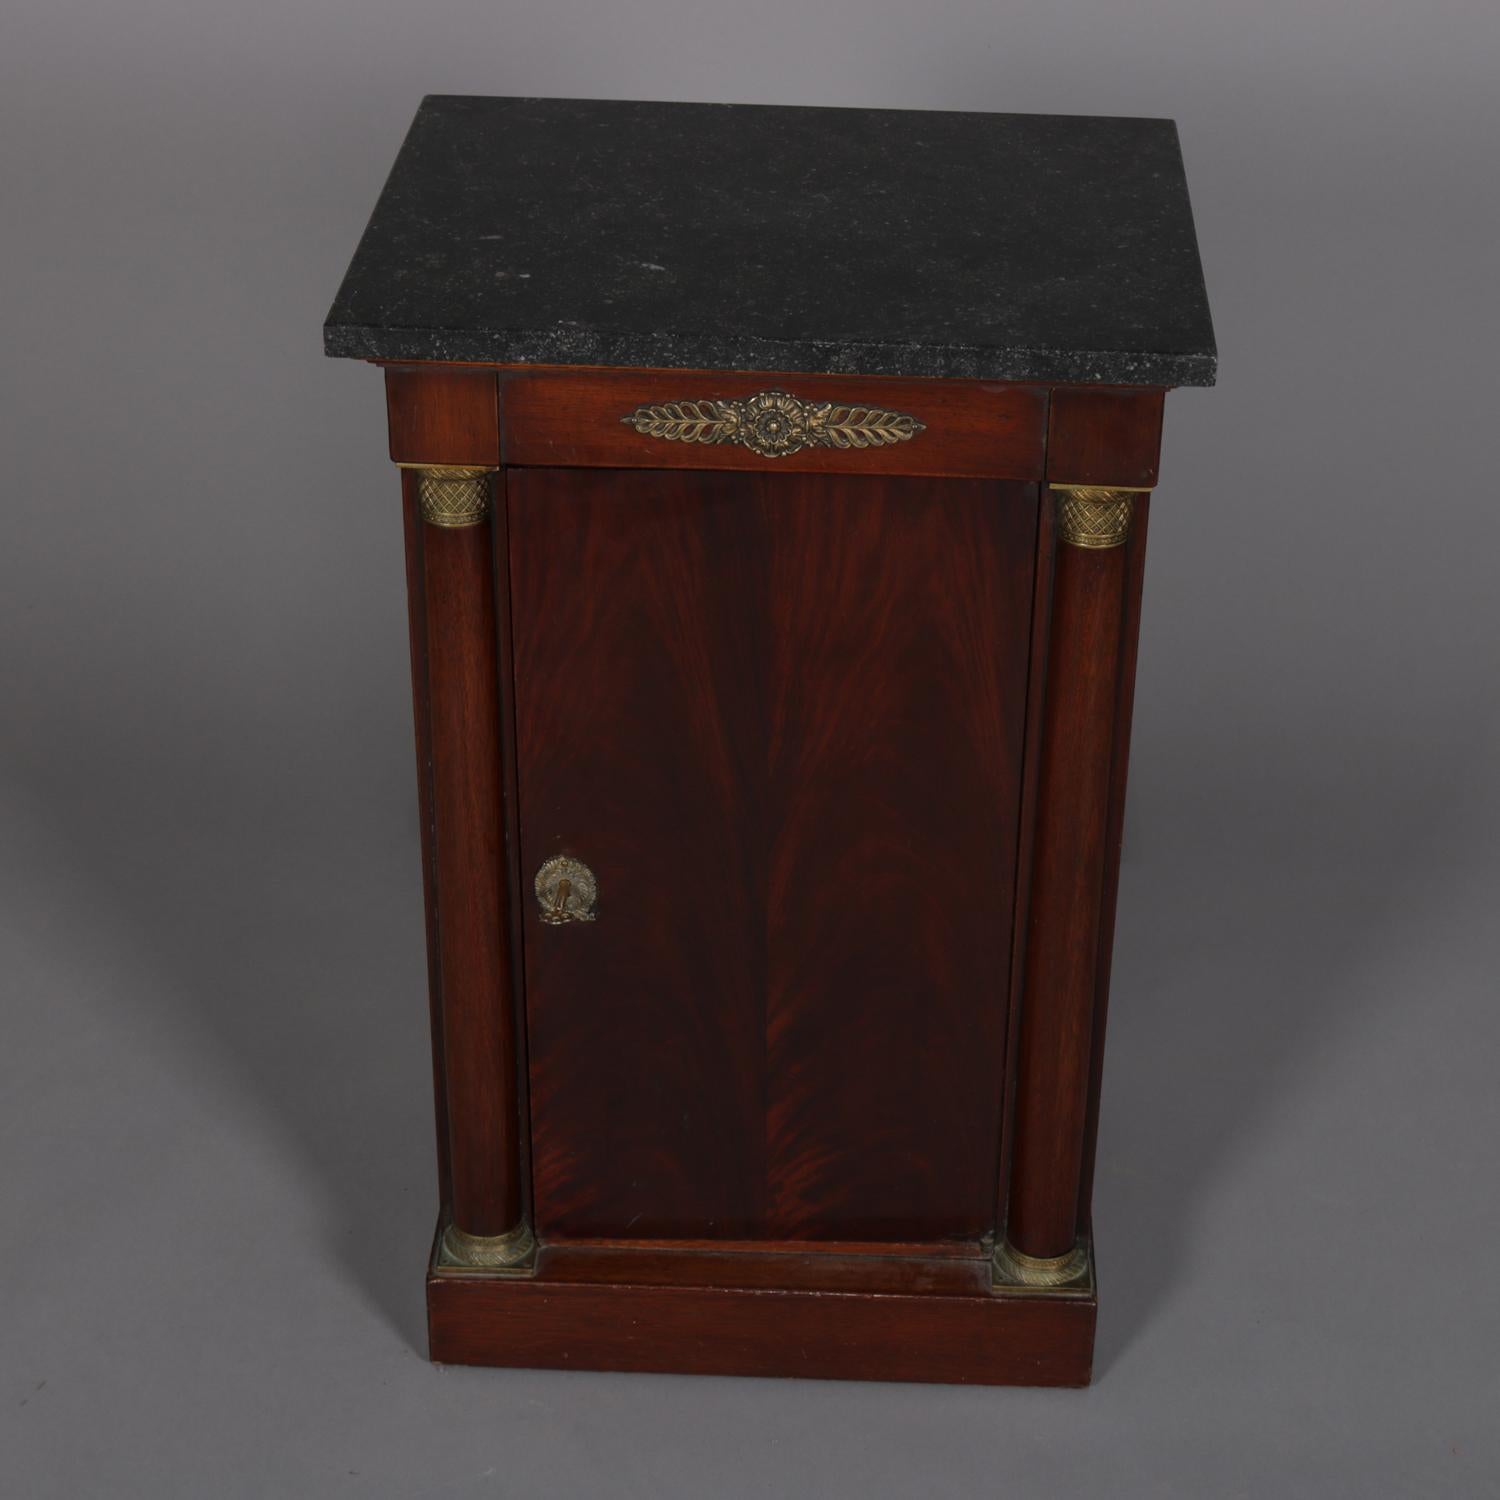 Antique French Empire Mahogany & Bronze Marble Top Side Cabinet, 20th Century (Französisch)